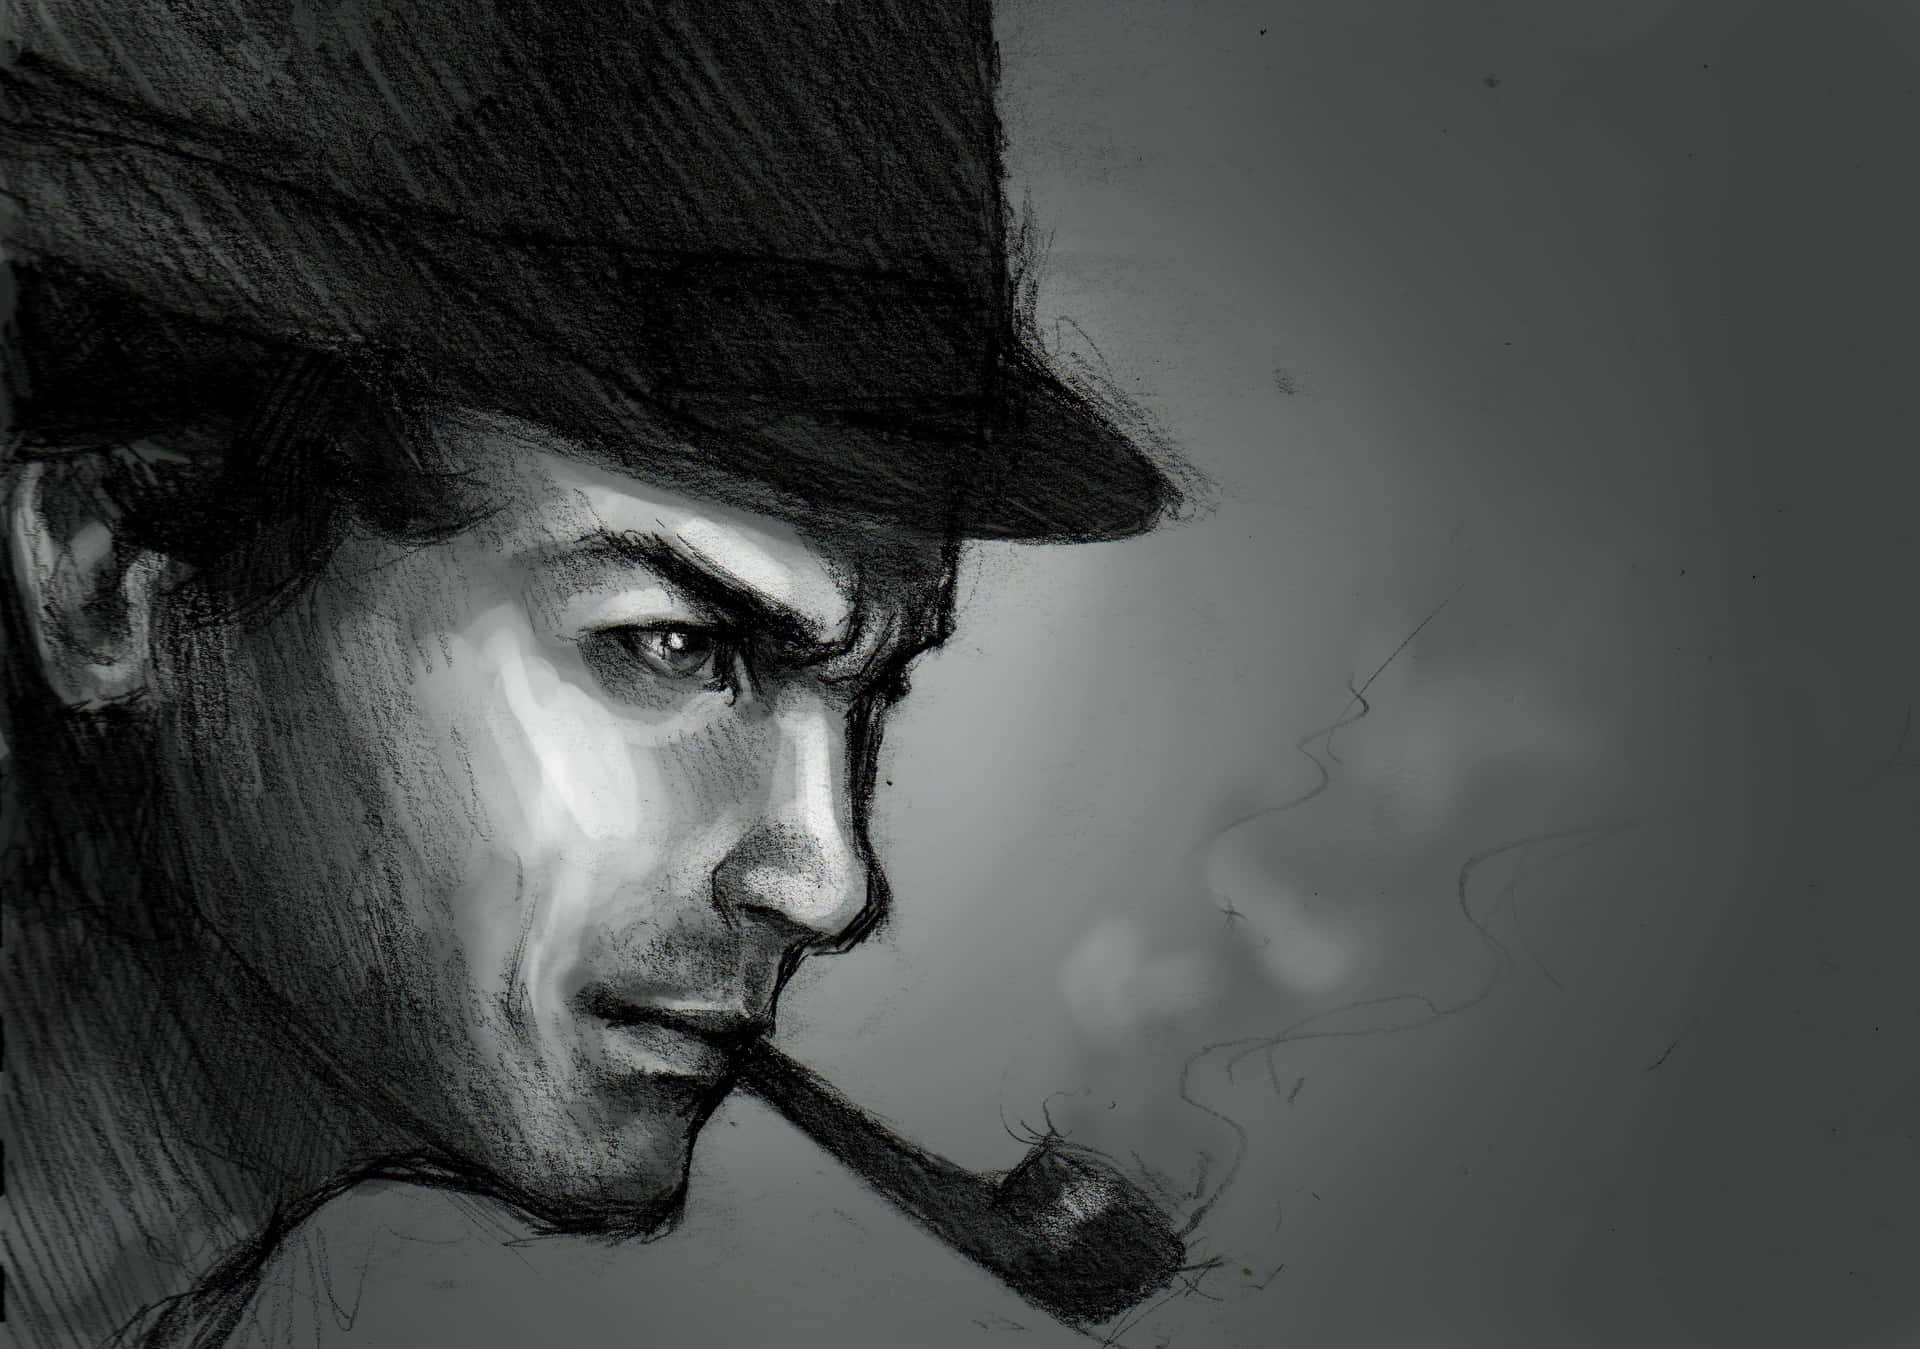 Arsène Lupin, the Gentleman Thief, in action Wallpaper